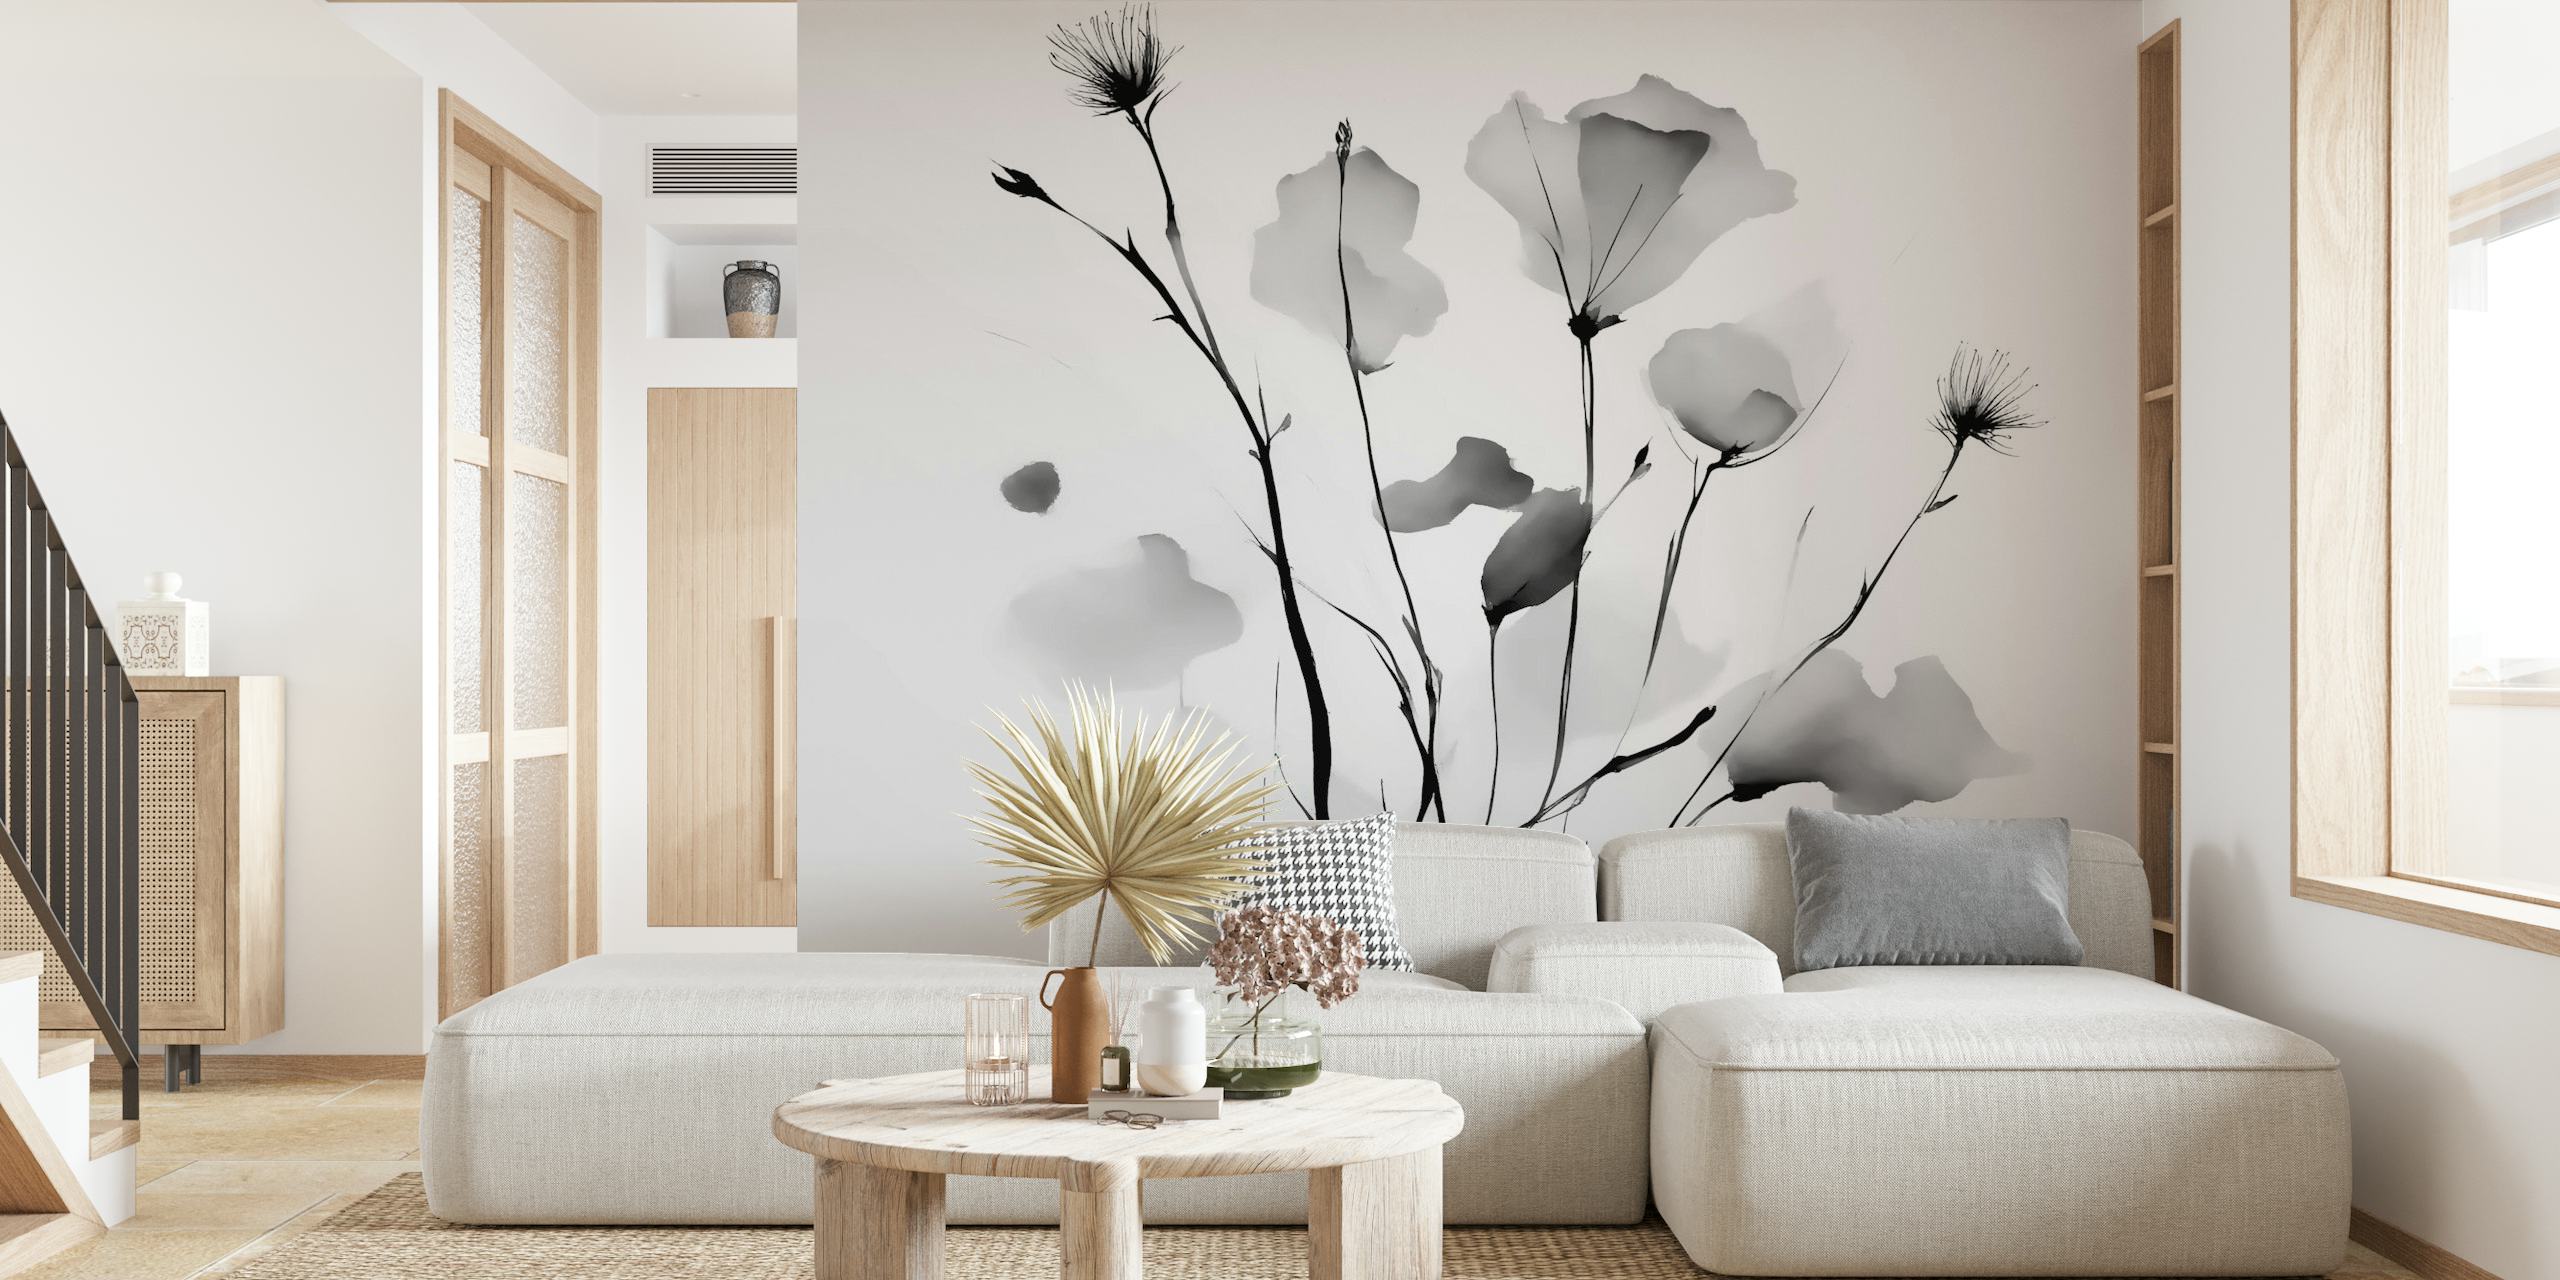 Japanese Meadow Black White floral wall mural in a monochrome style